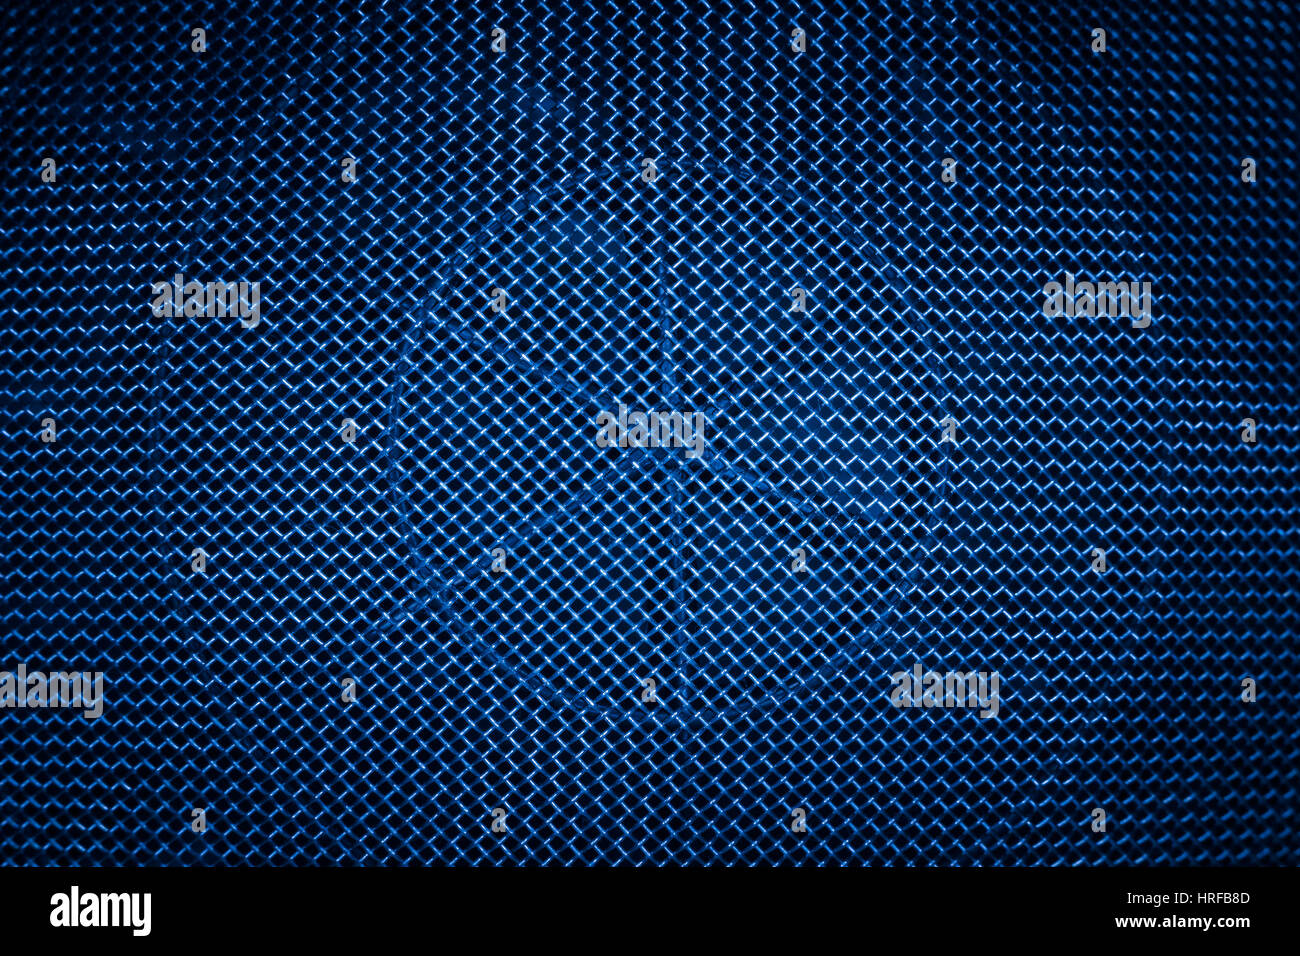 Metal net texture, blue abstract background Stock Photo